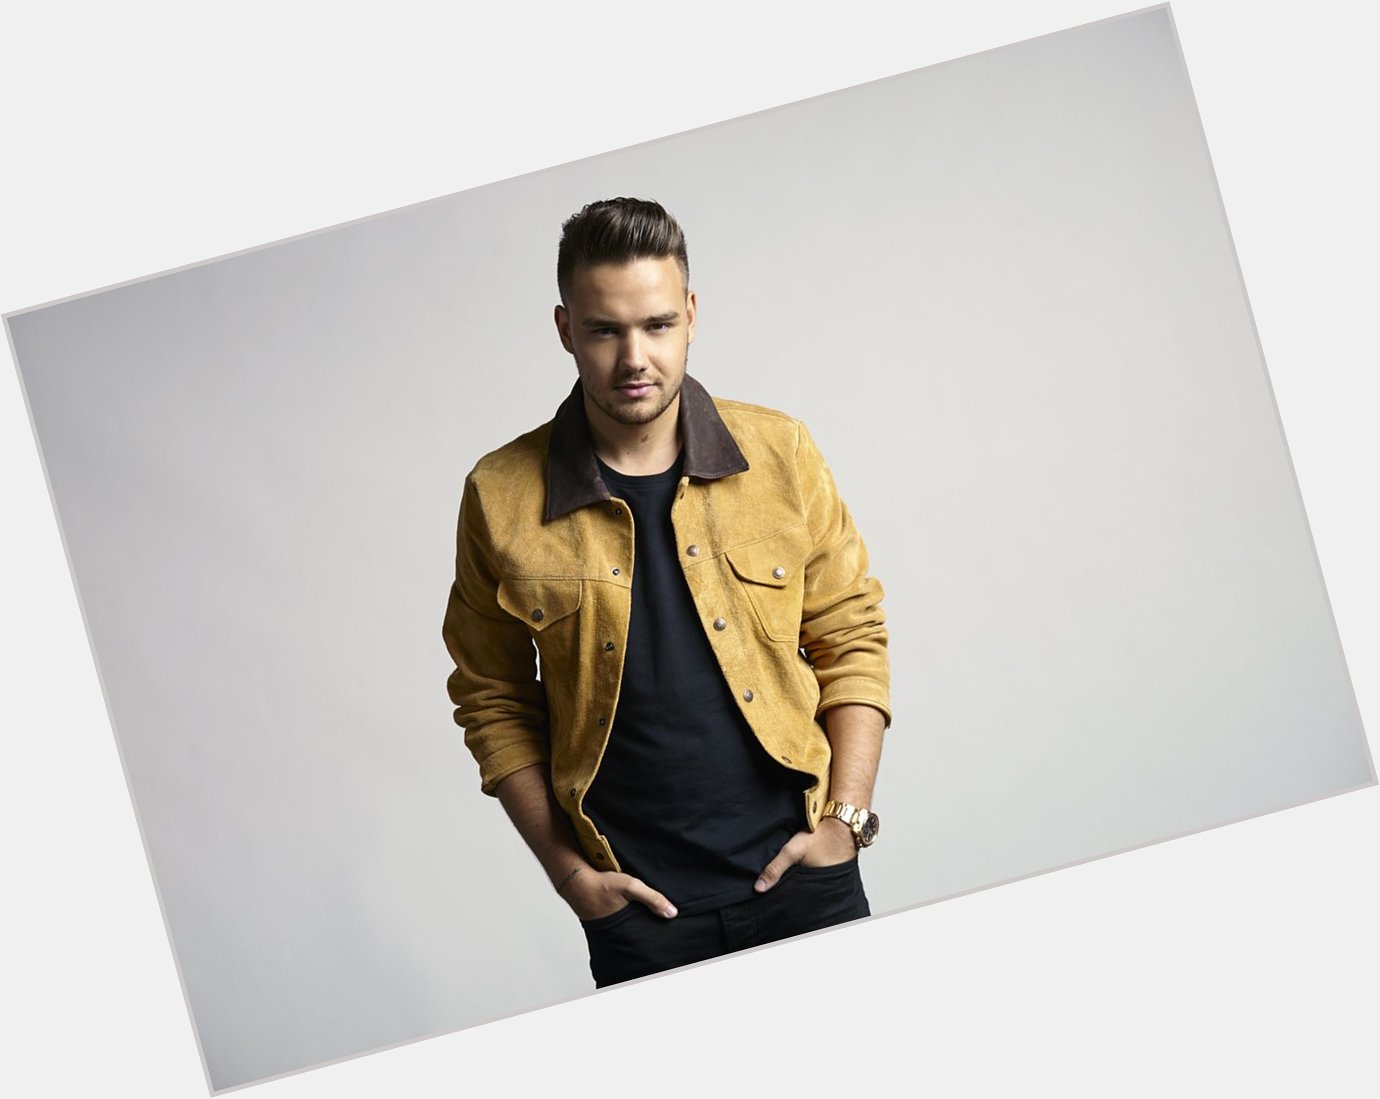  I just wanna have fun and get rowdy!   Everyone wish Liam Payne a happy birthday! 